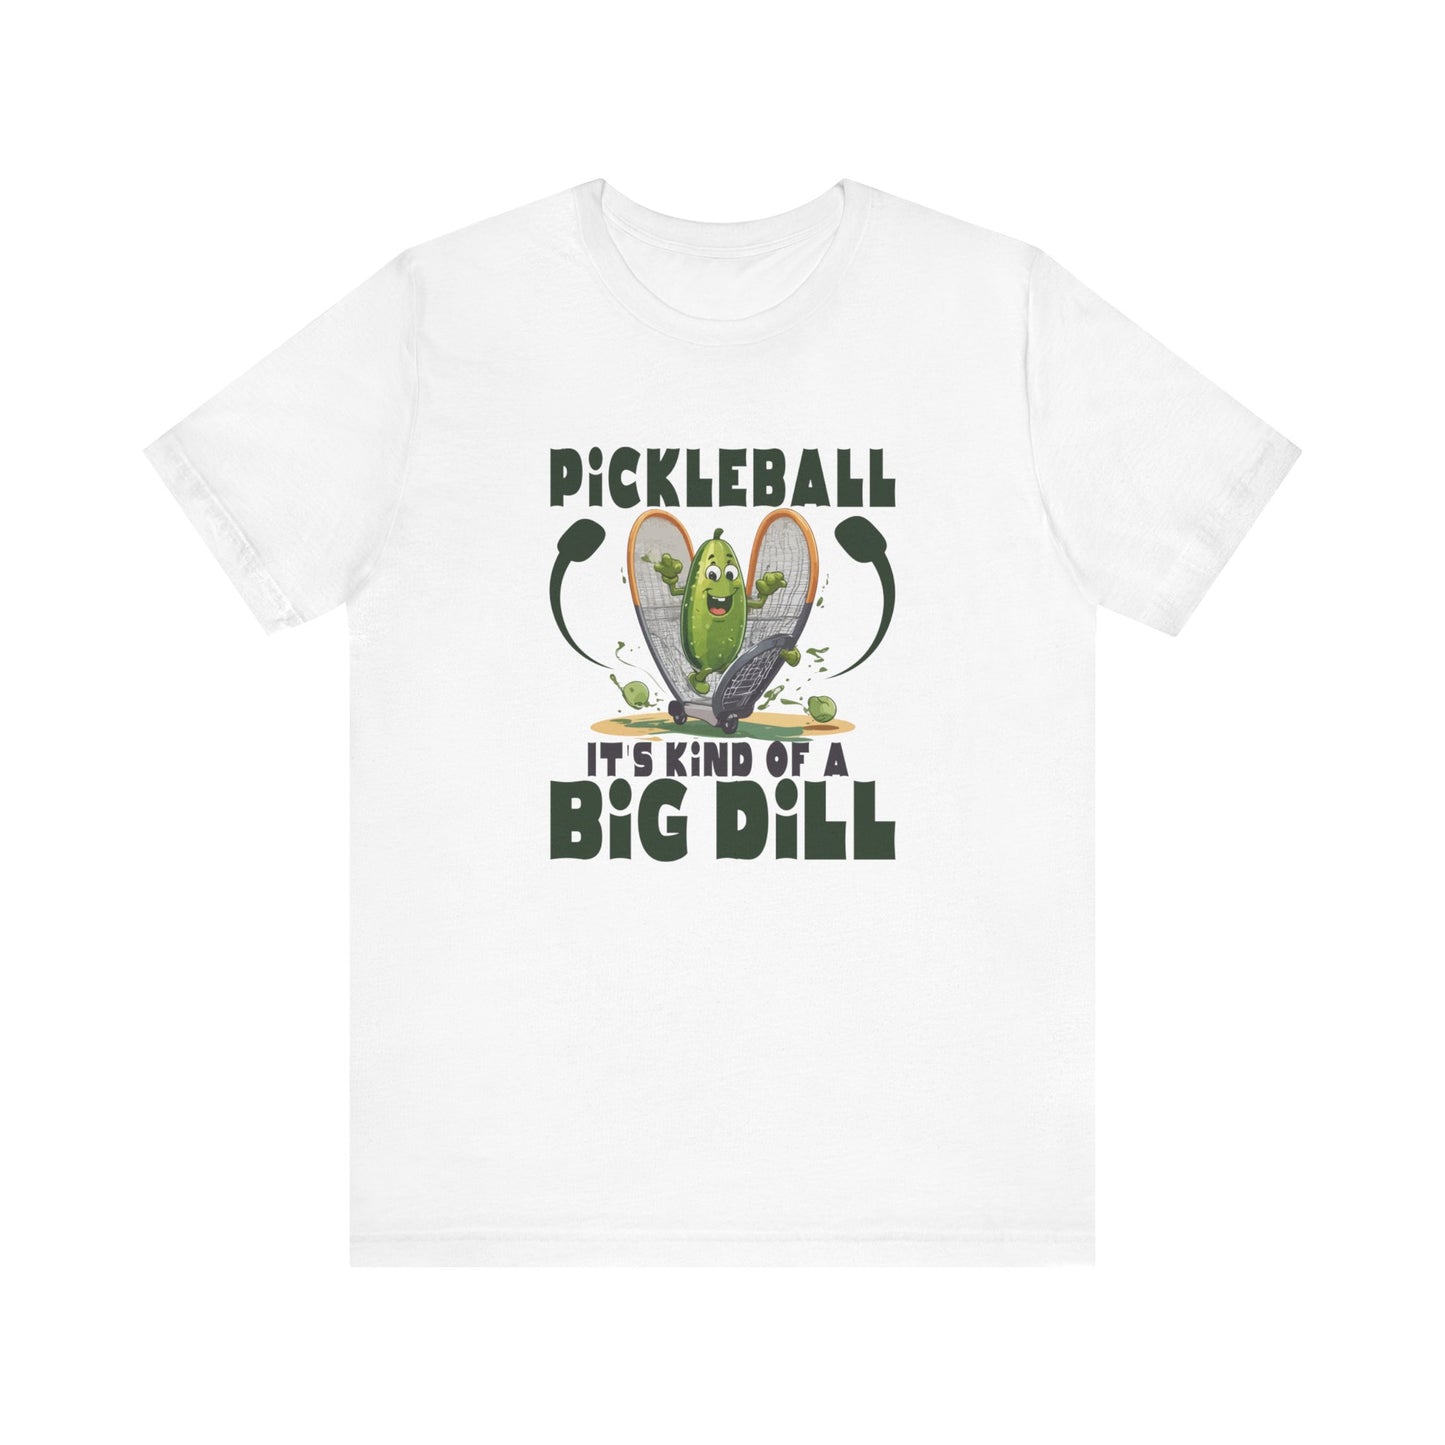 Pickle Ball, It's Kind of a Big Dill - Unisex Jersey Short Sleeve Tee